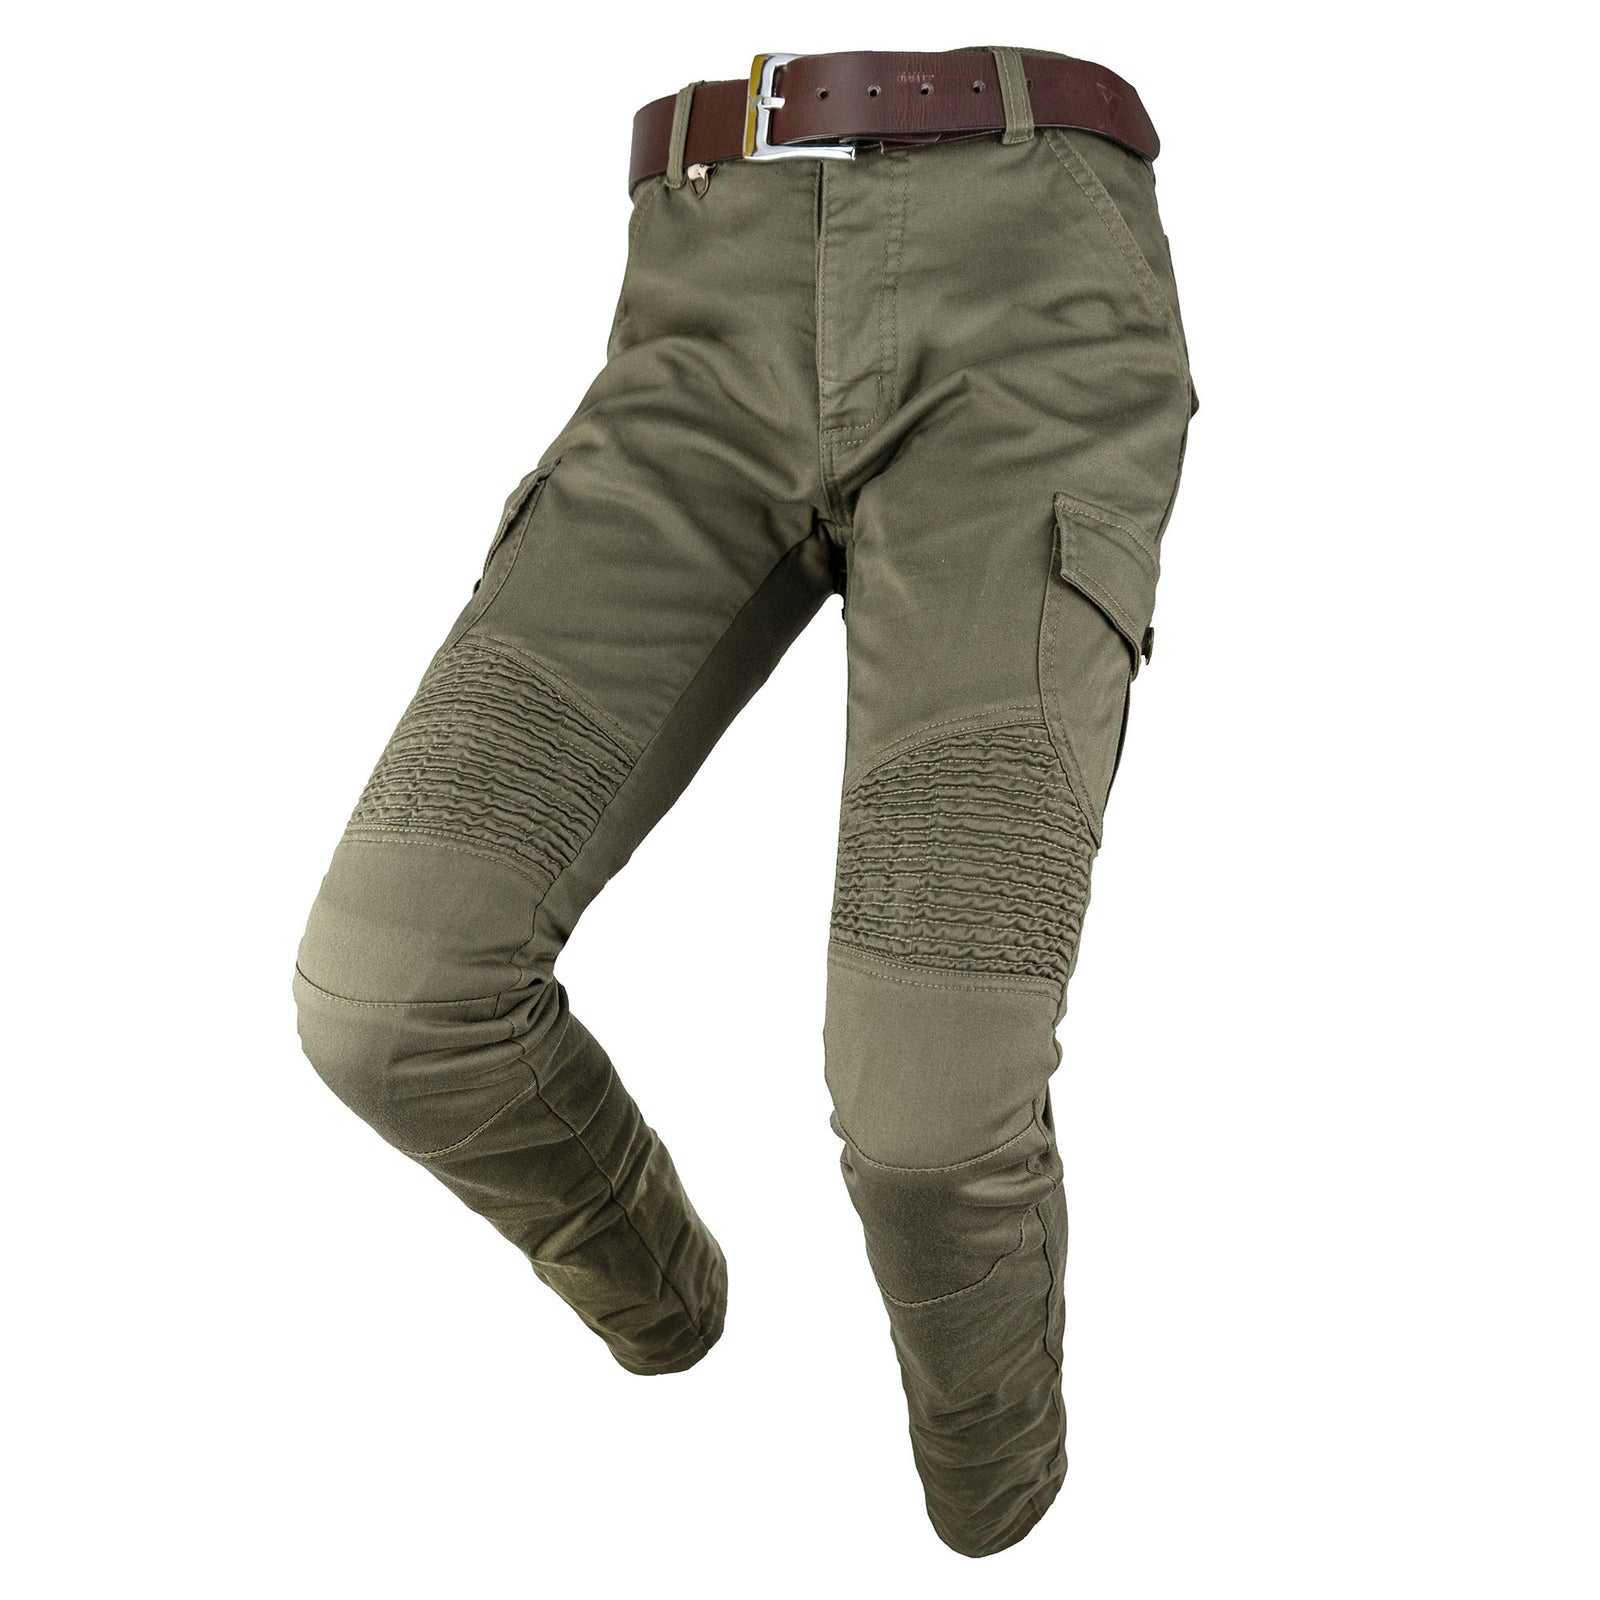 Black Cotton Stretch Motorcycle Cargo Pants - RhinoLeather